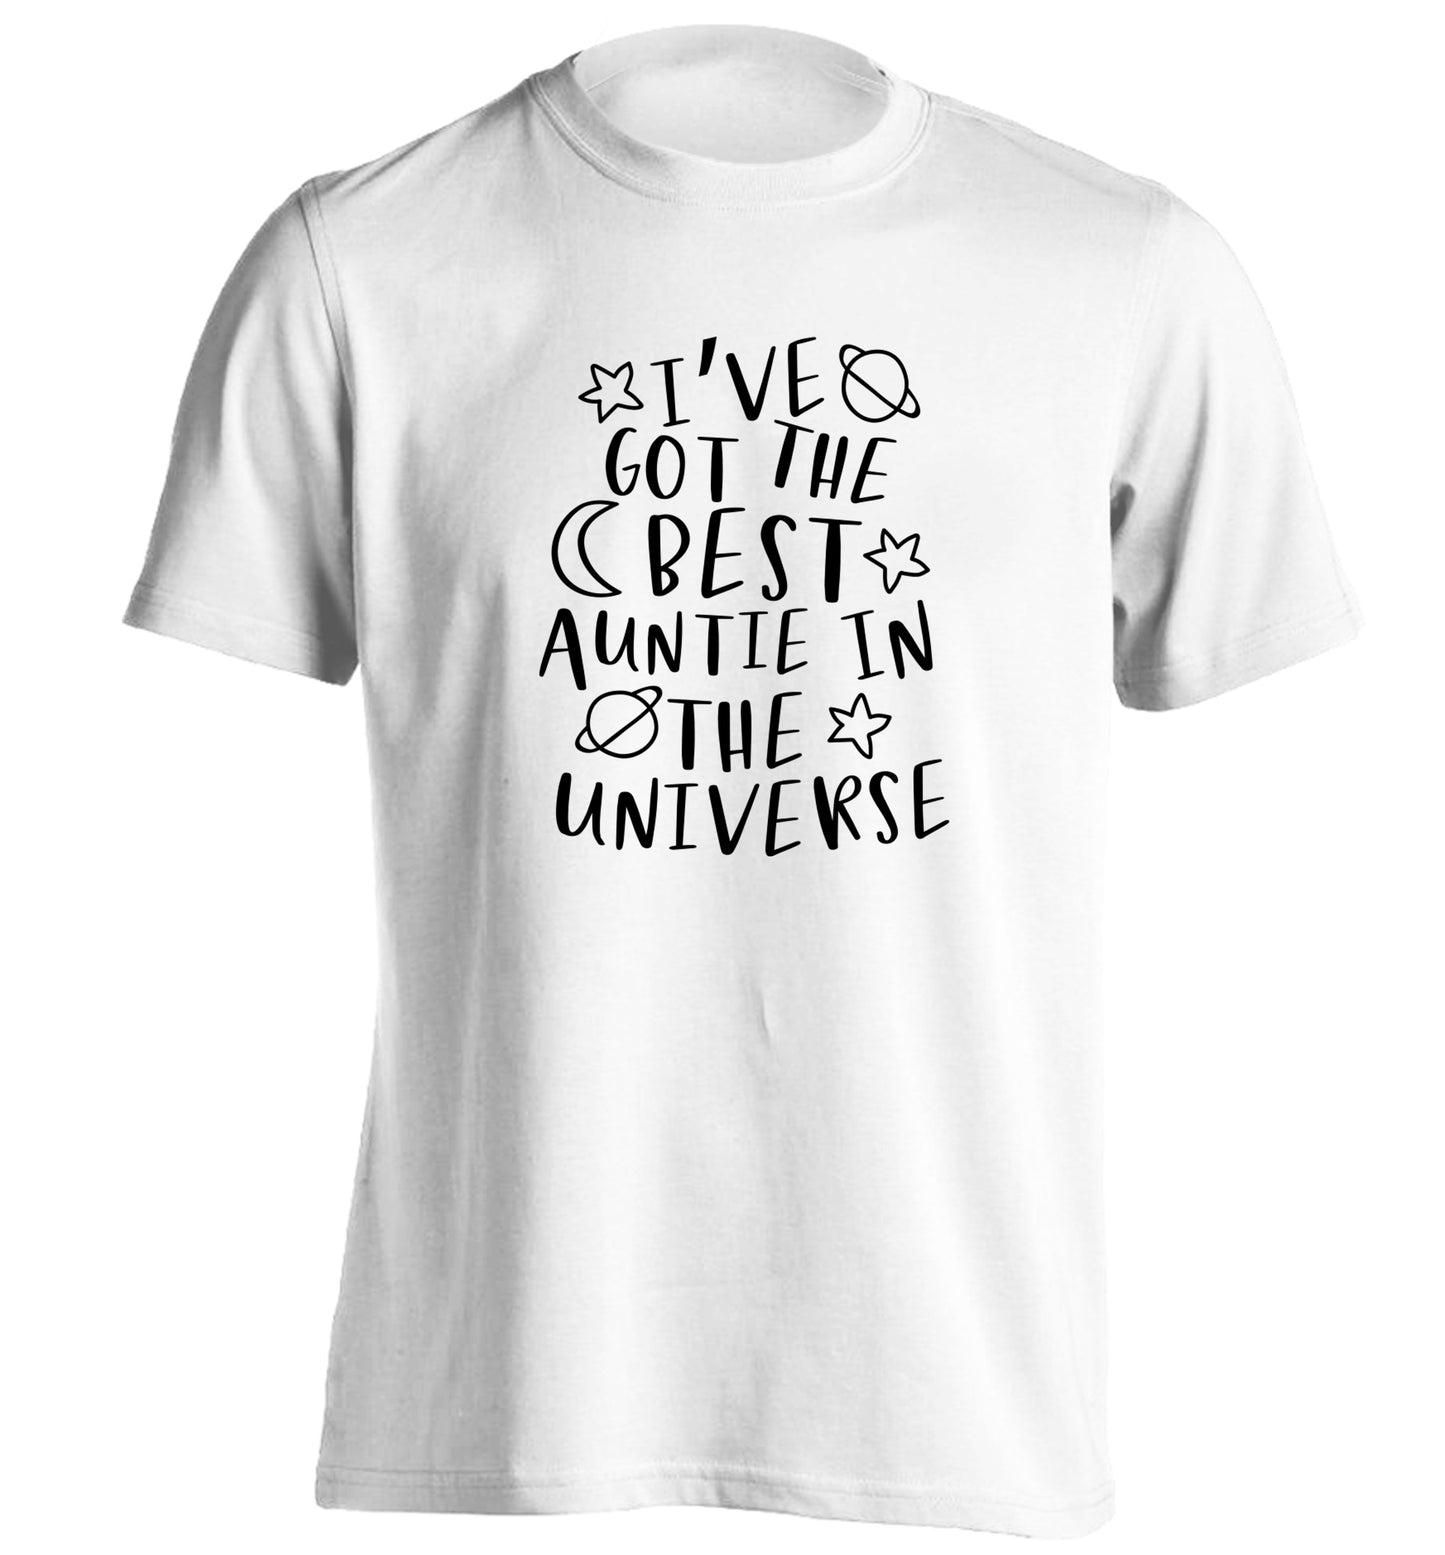 I've got the best auntie in the universe adults unisex white Tshirt 2XL